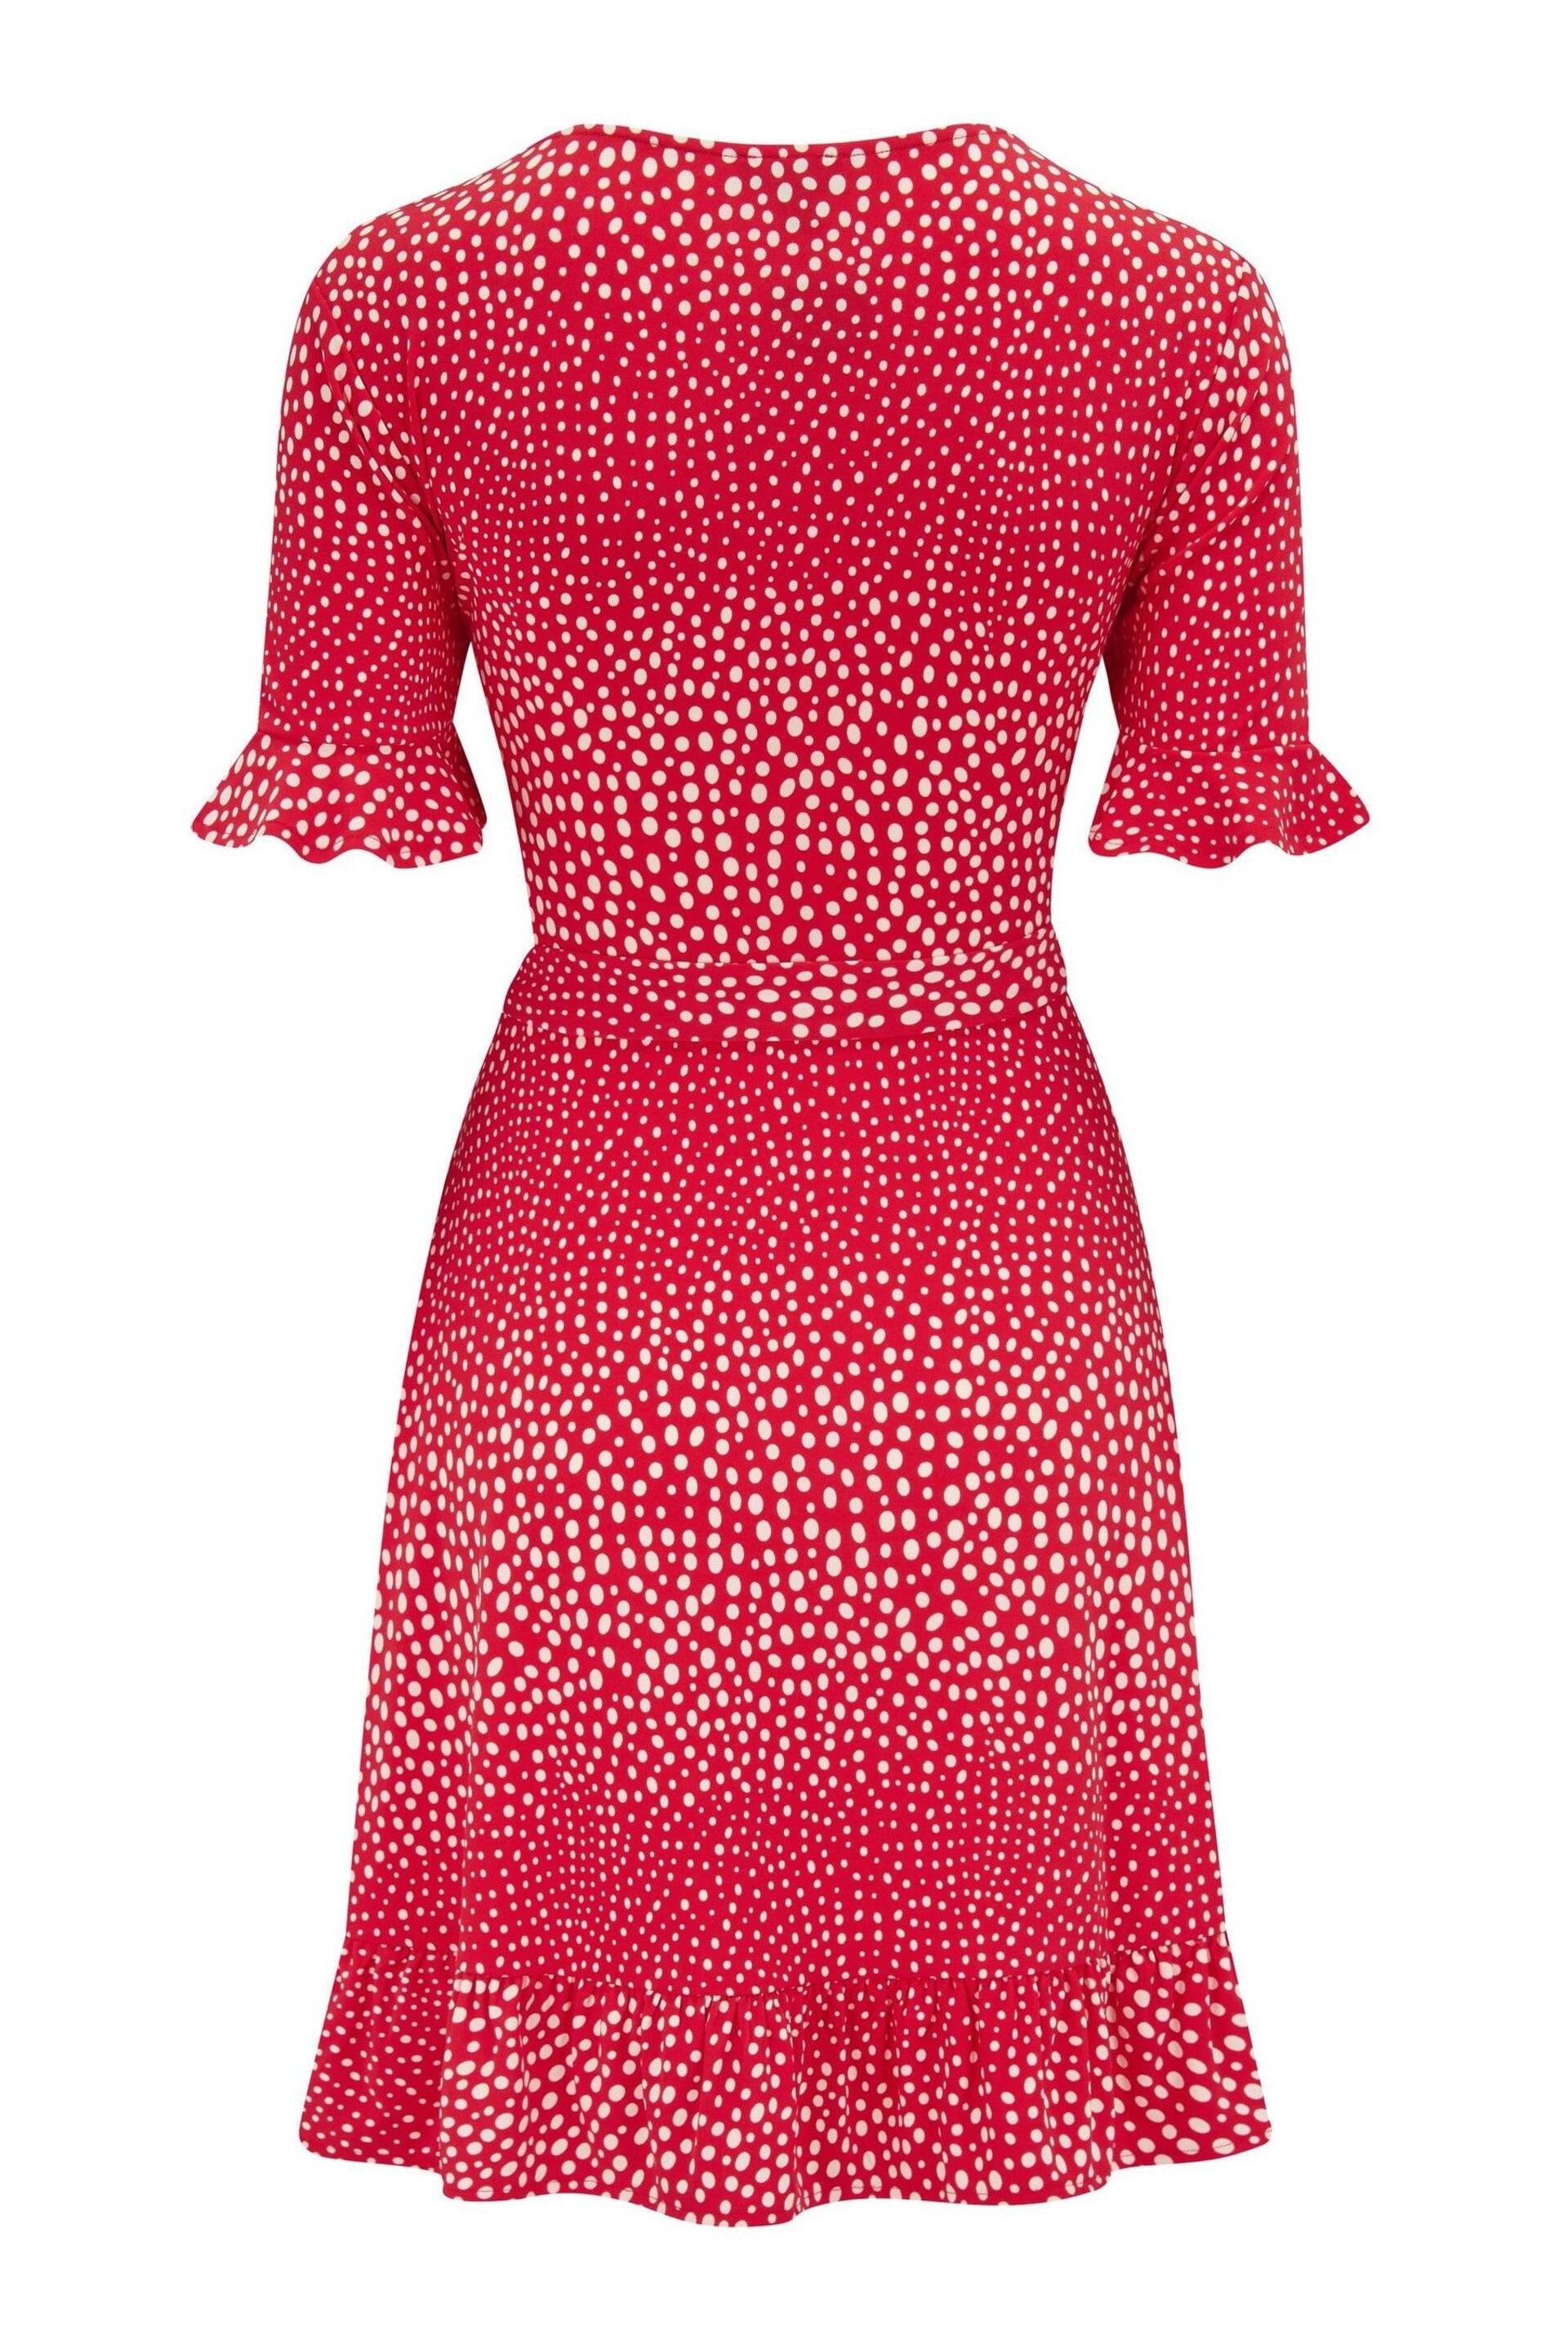 Pour Moi Red Birdie Frill Detail Slinky Recycled Stretch Dress - Image 4 of 4